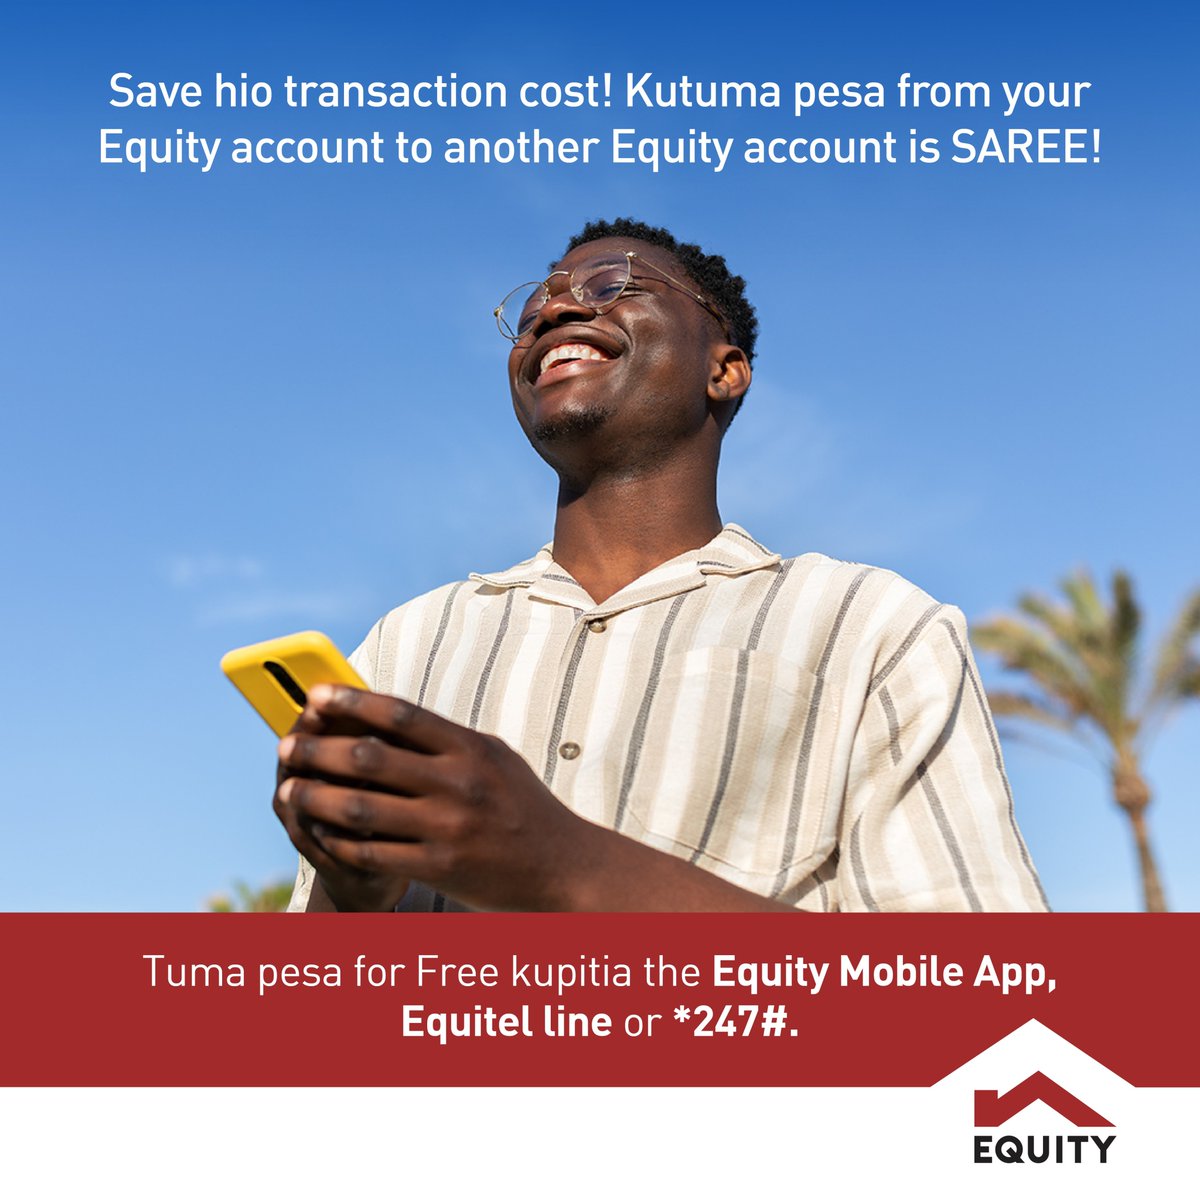 A shilling saved here and there adds up-to savings for a loaf of bread, fare for one week, ama groceries za two days. Tuma pesa for FREE from Equity to Equity through any of these channels: Equity Mobile App, *247#, or your Equitel line and SAVE BIG!